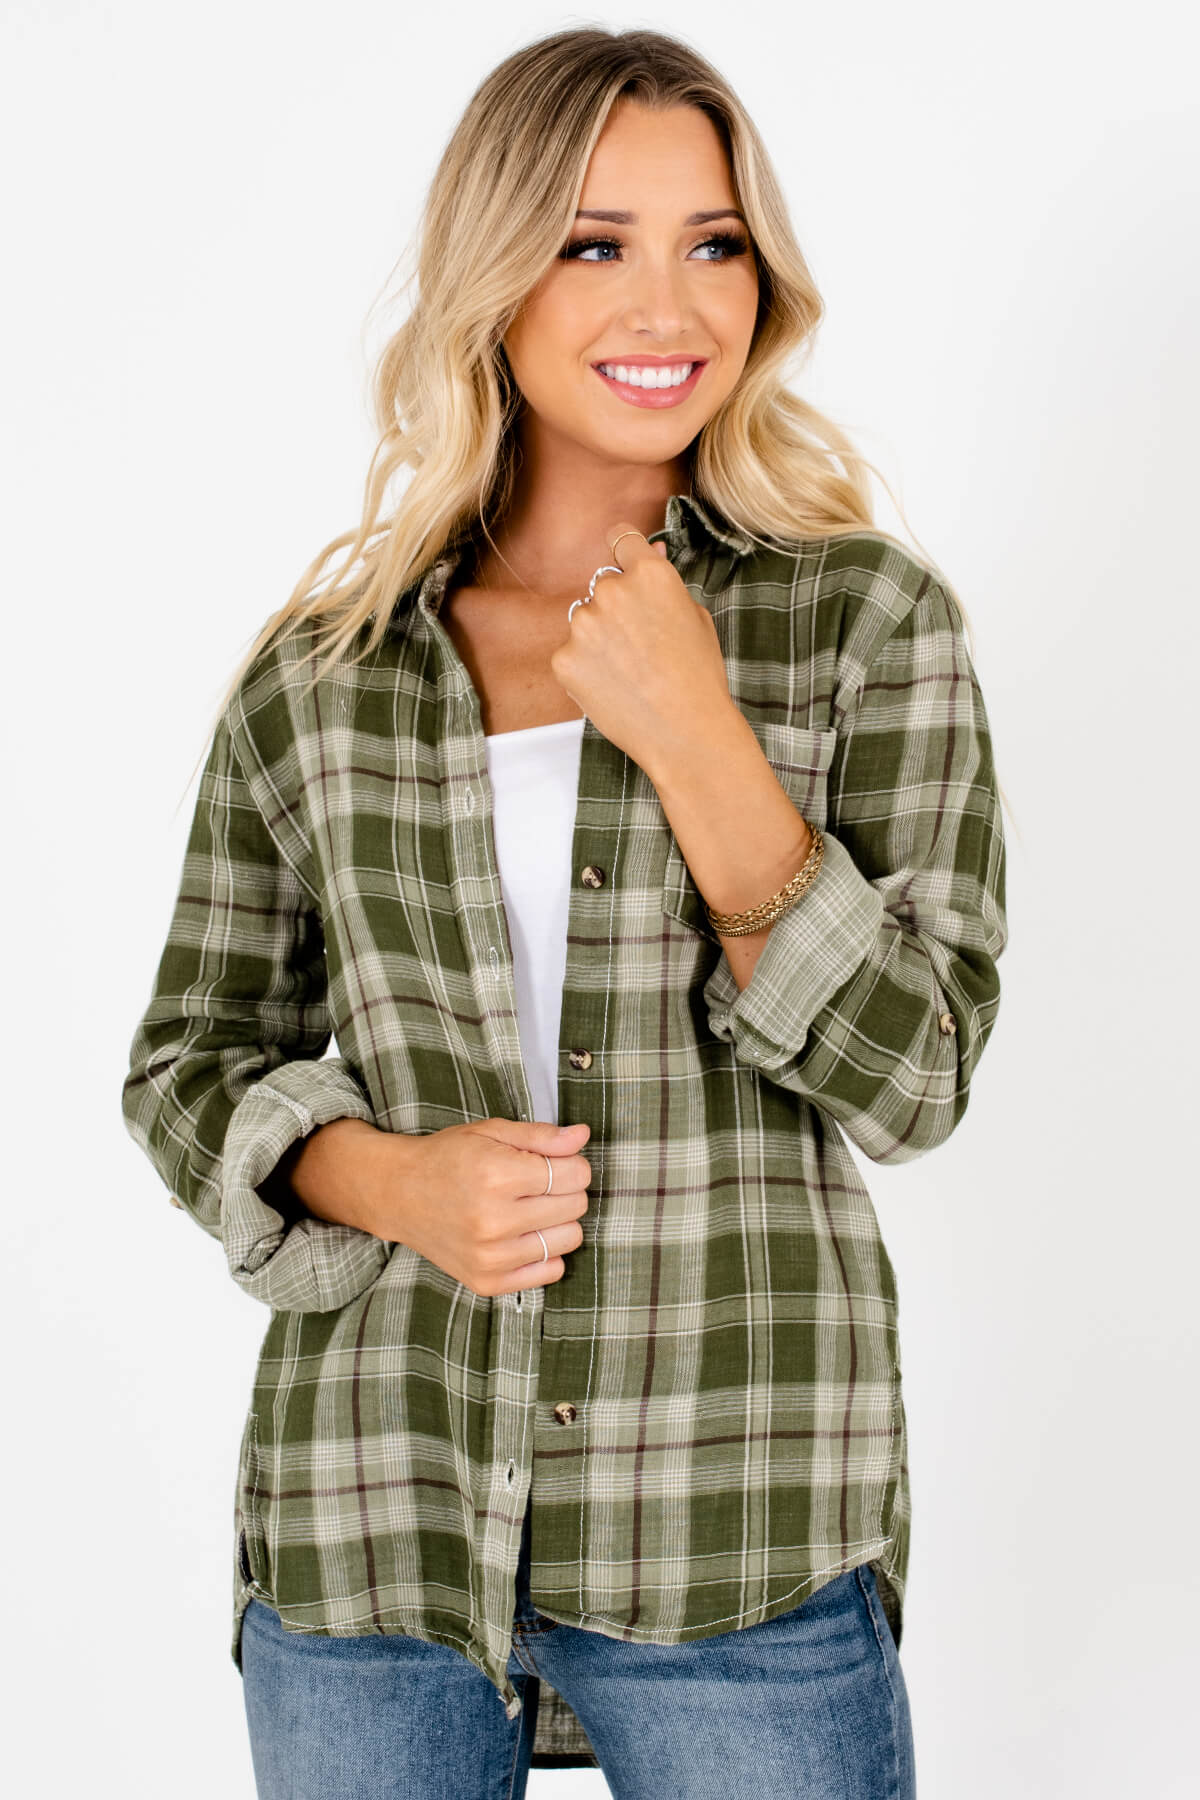 Green Plaid Cute and Comfortable Boutique Tops for Women